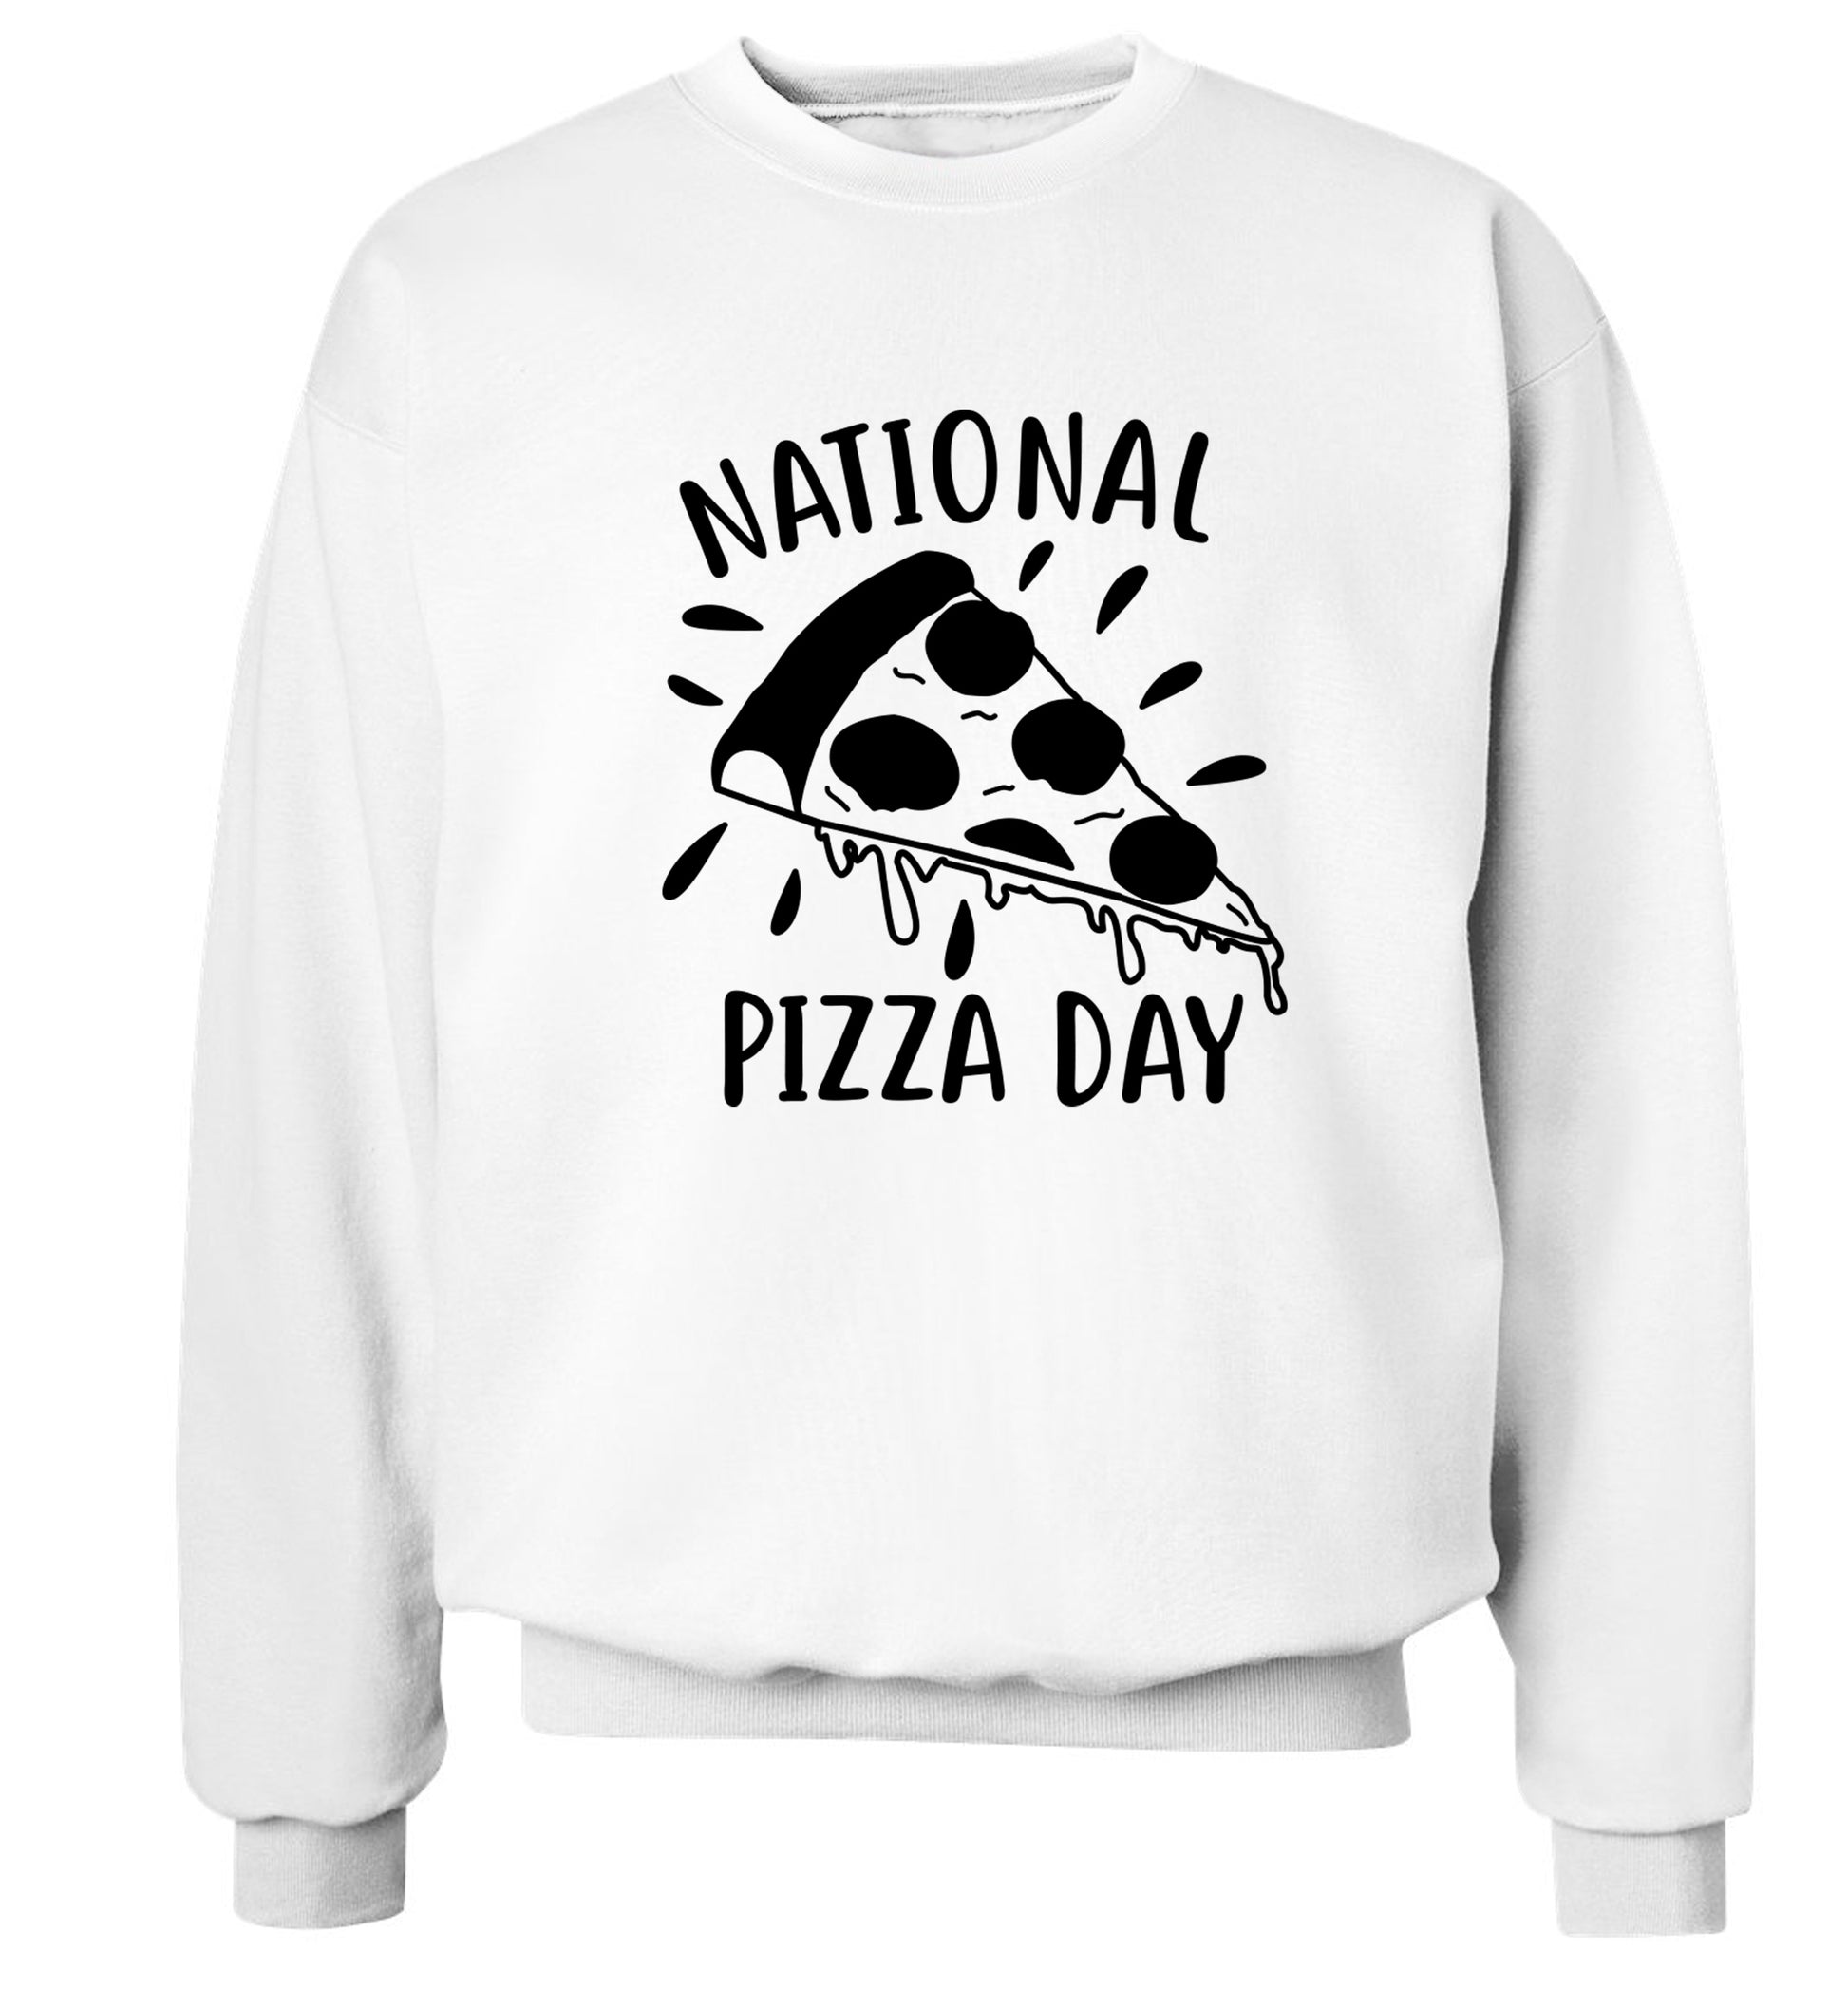 National pizza day Adult's unisex white Sweater 2XL